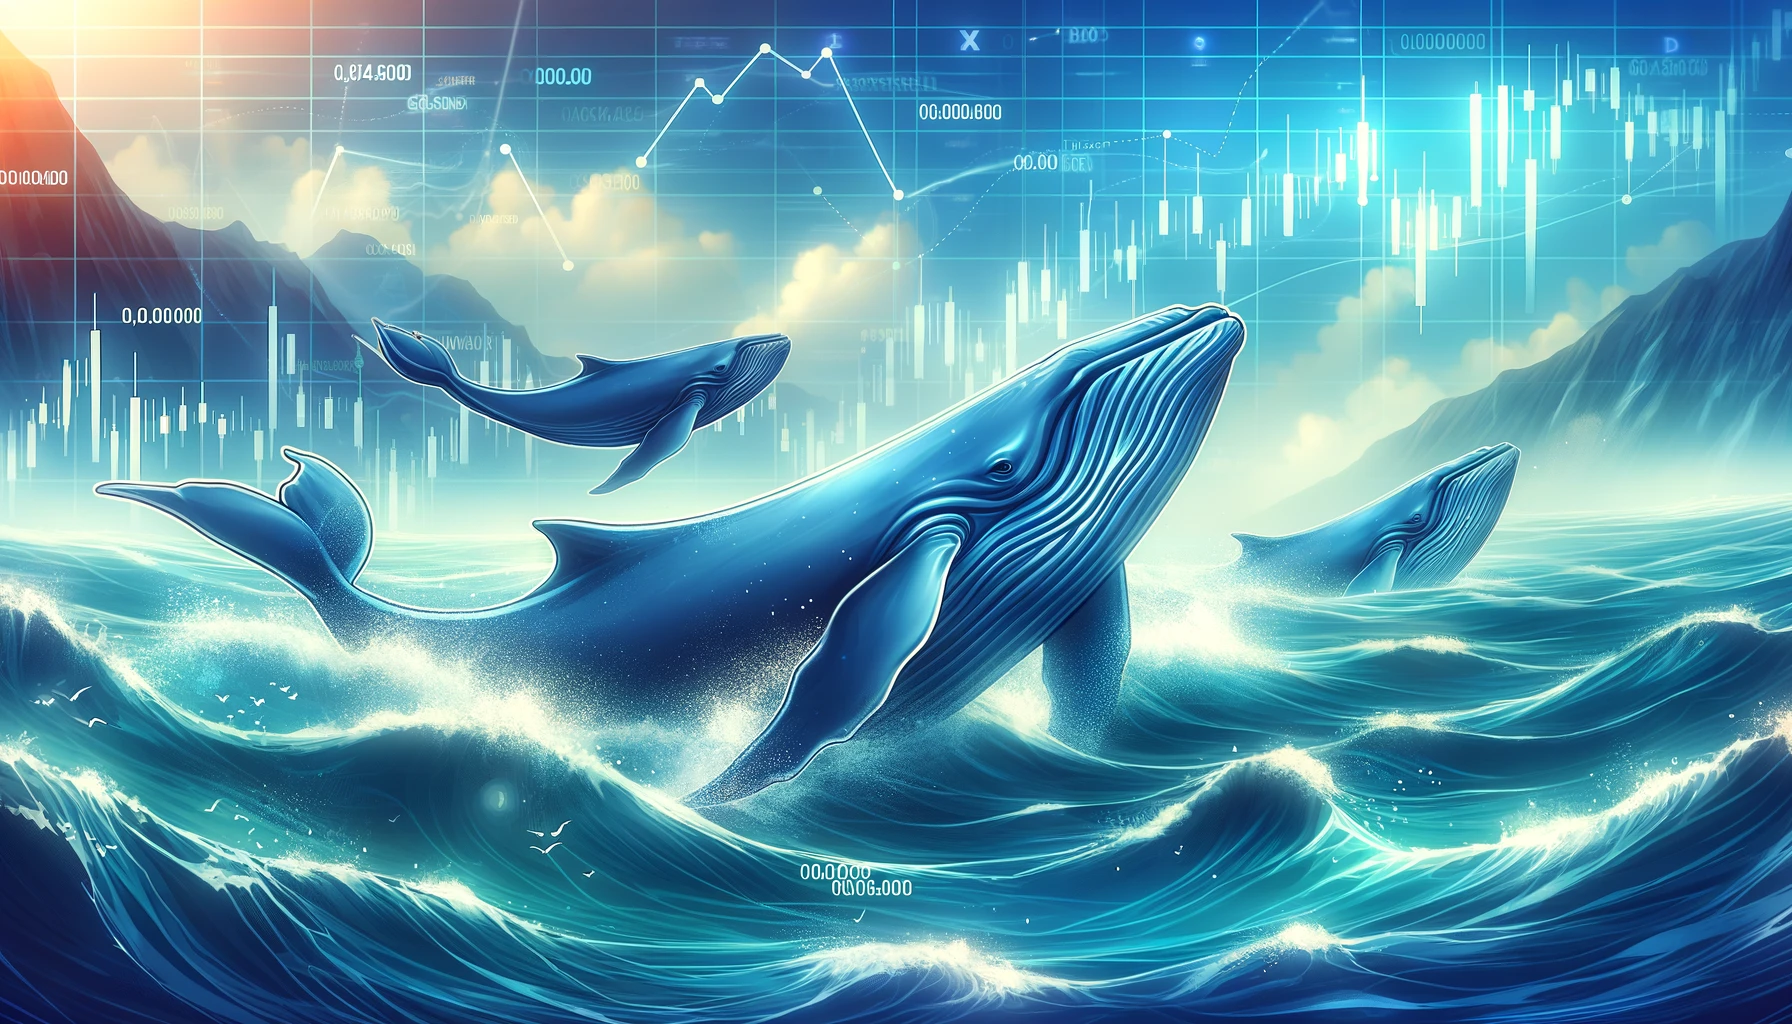 Shiba Inu One Of The Most-Traded Tokens By Whales, Data Shows